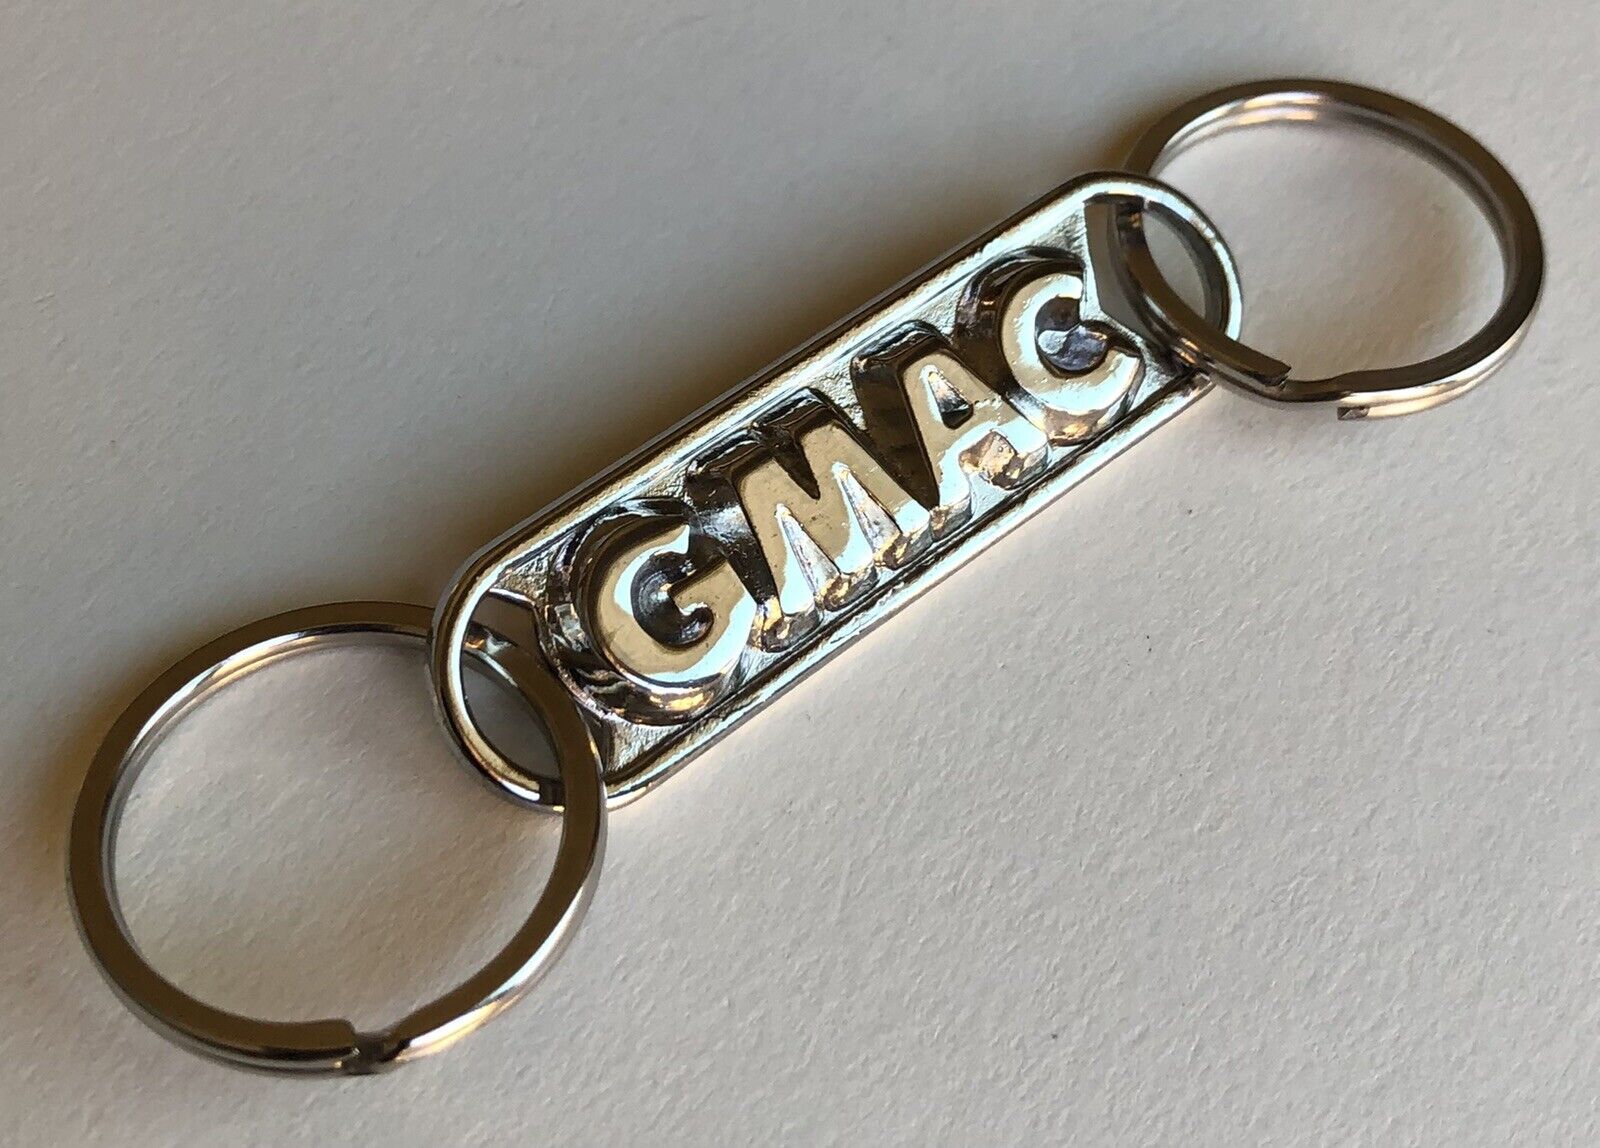 Vintage GMAC Key Chain Fob Lost Return Double Ring USA